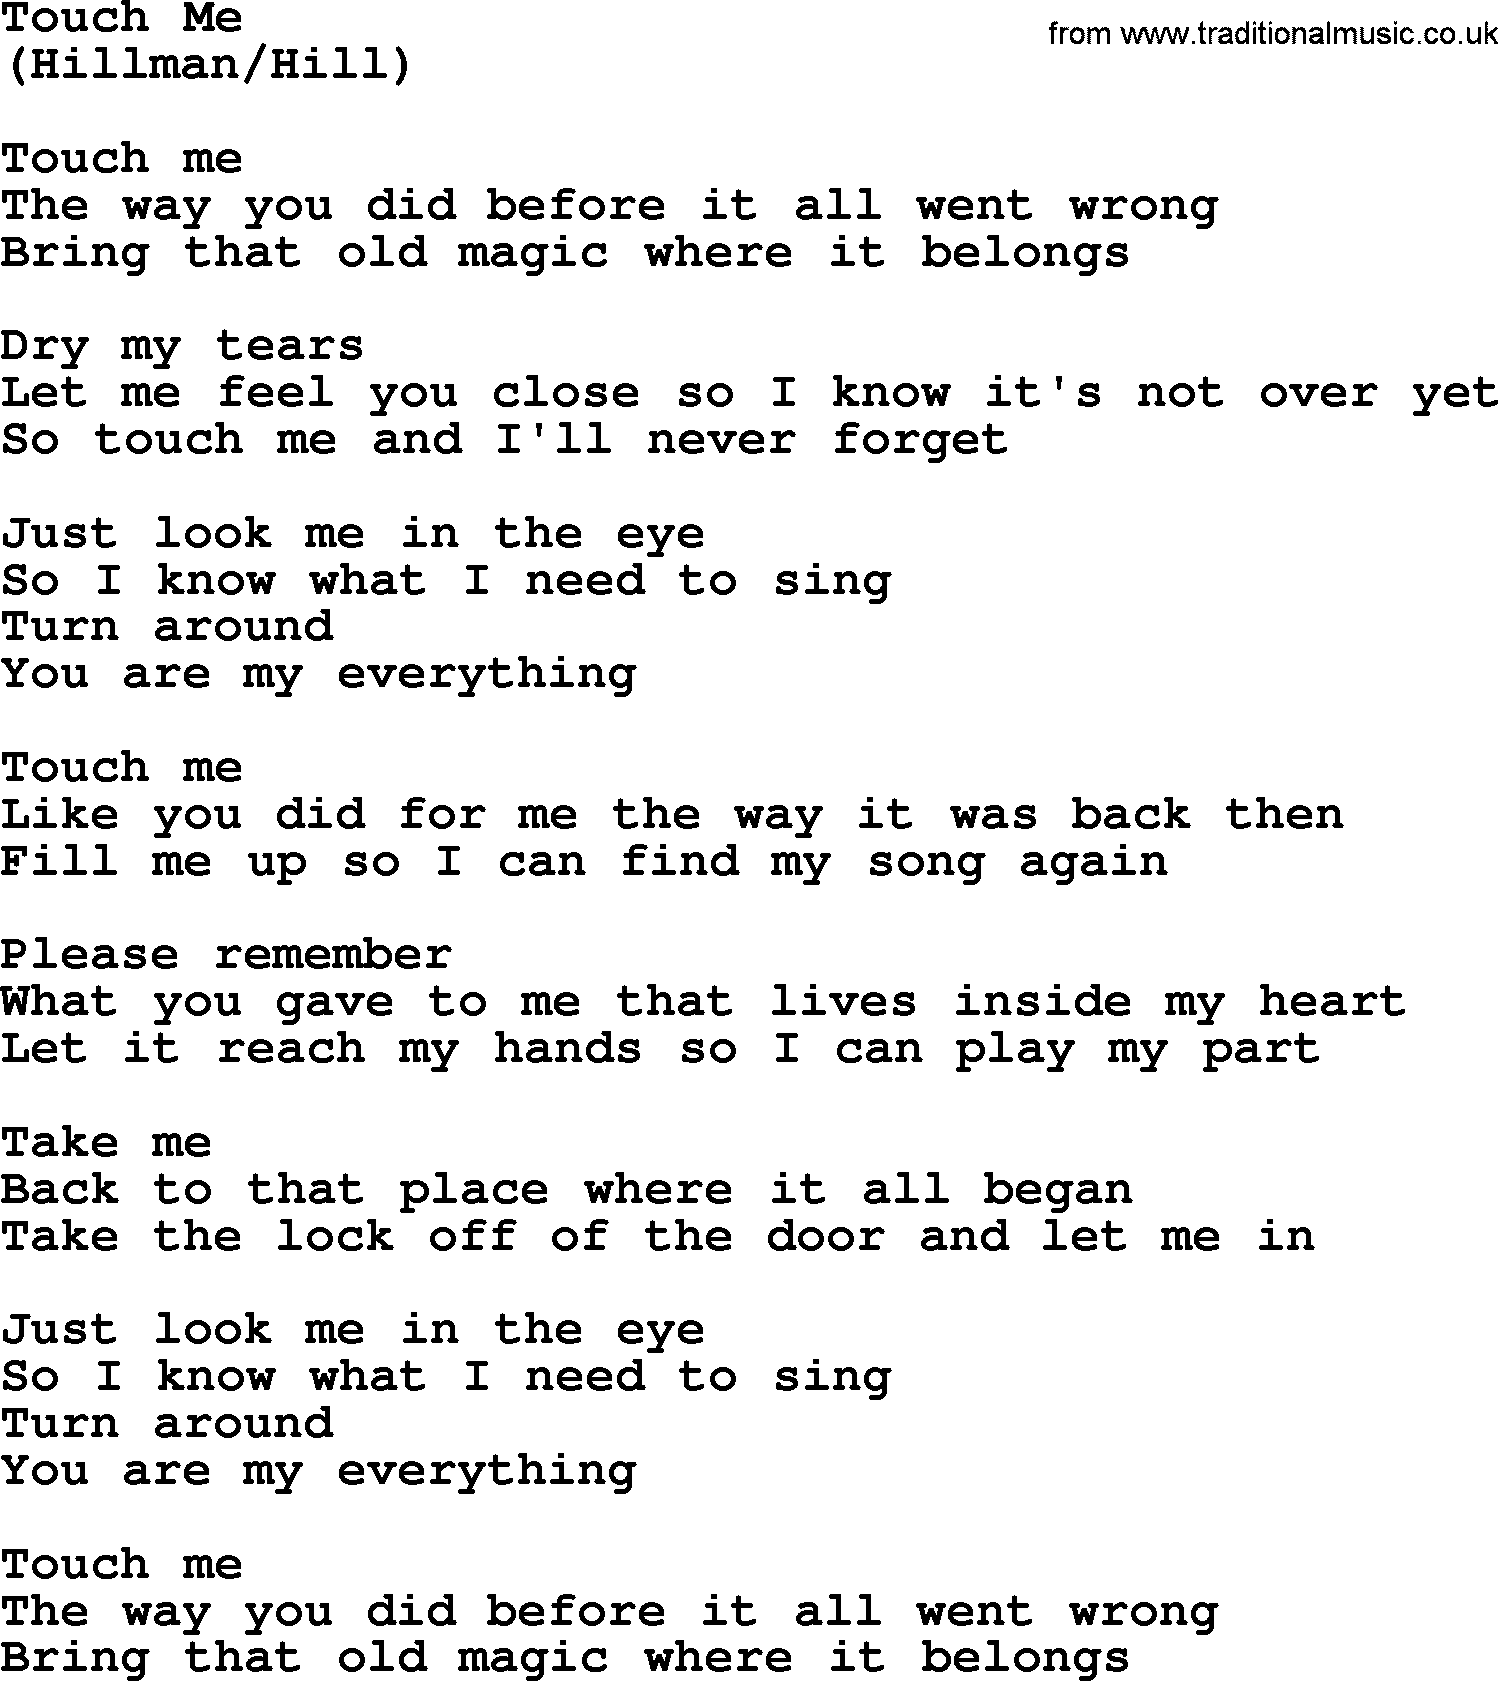 The Byrds song Touch Me, lyrics